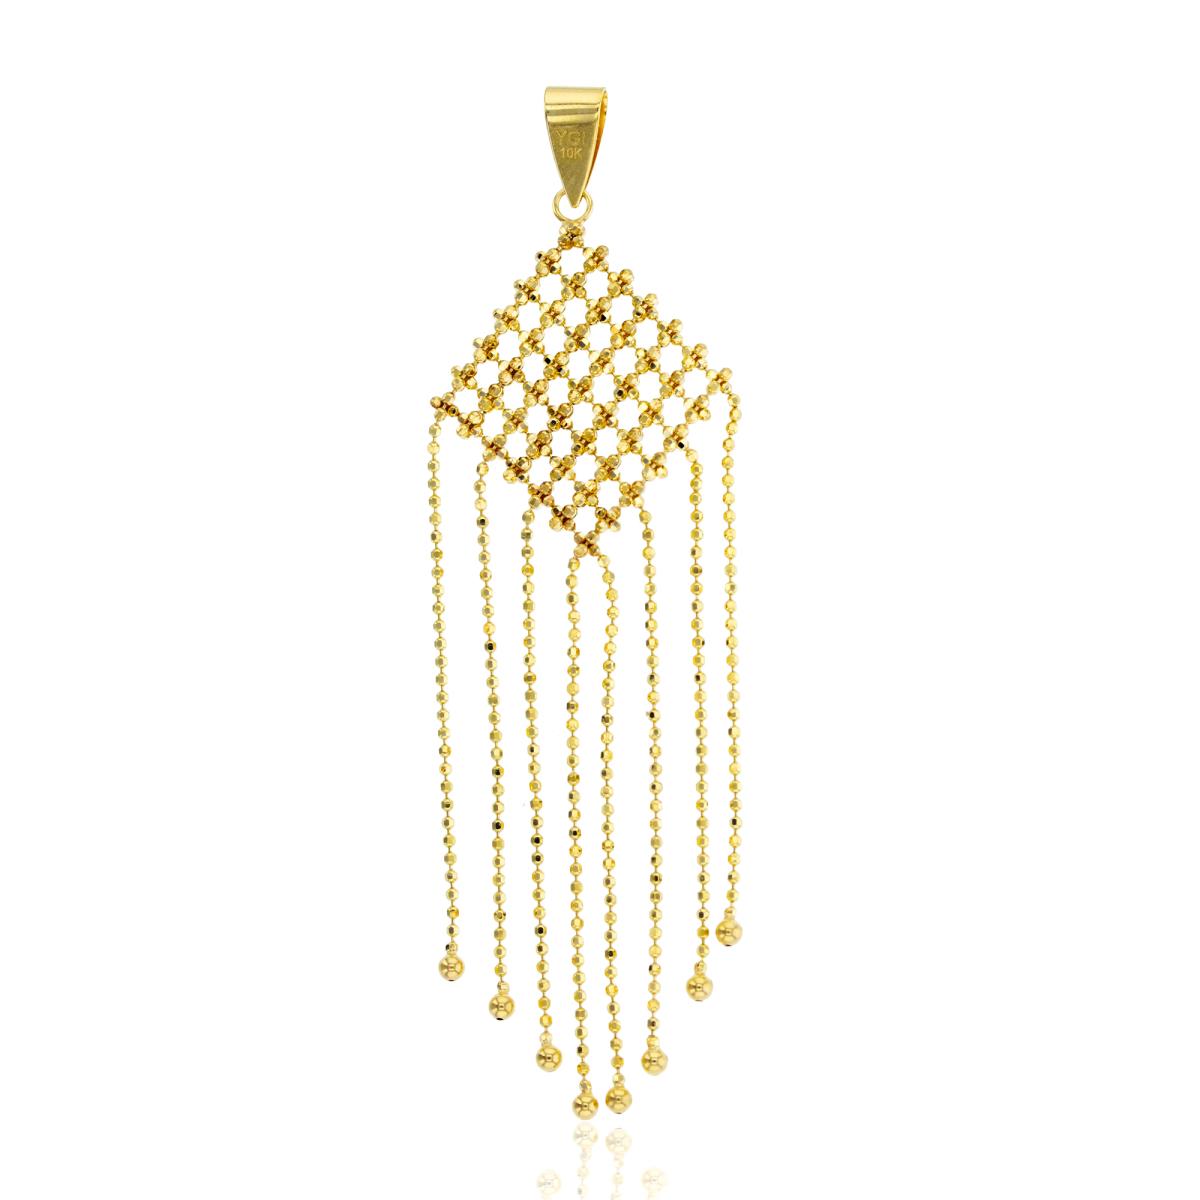 10K Yellow Gold Diamond Cut Basketweaved with Dangling Beaded Rows 18" Necklace